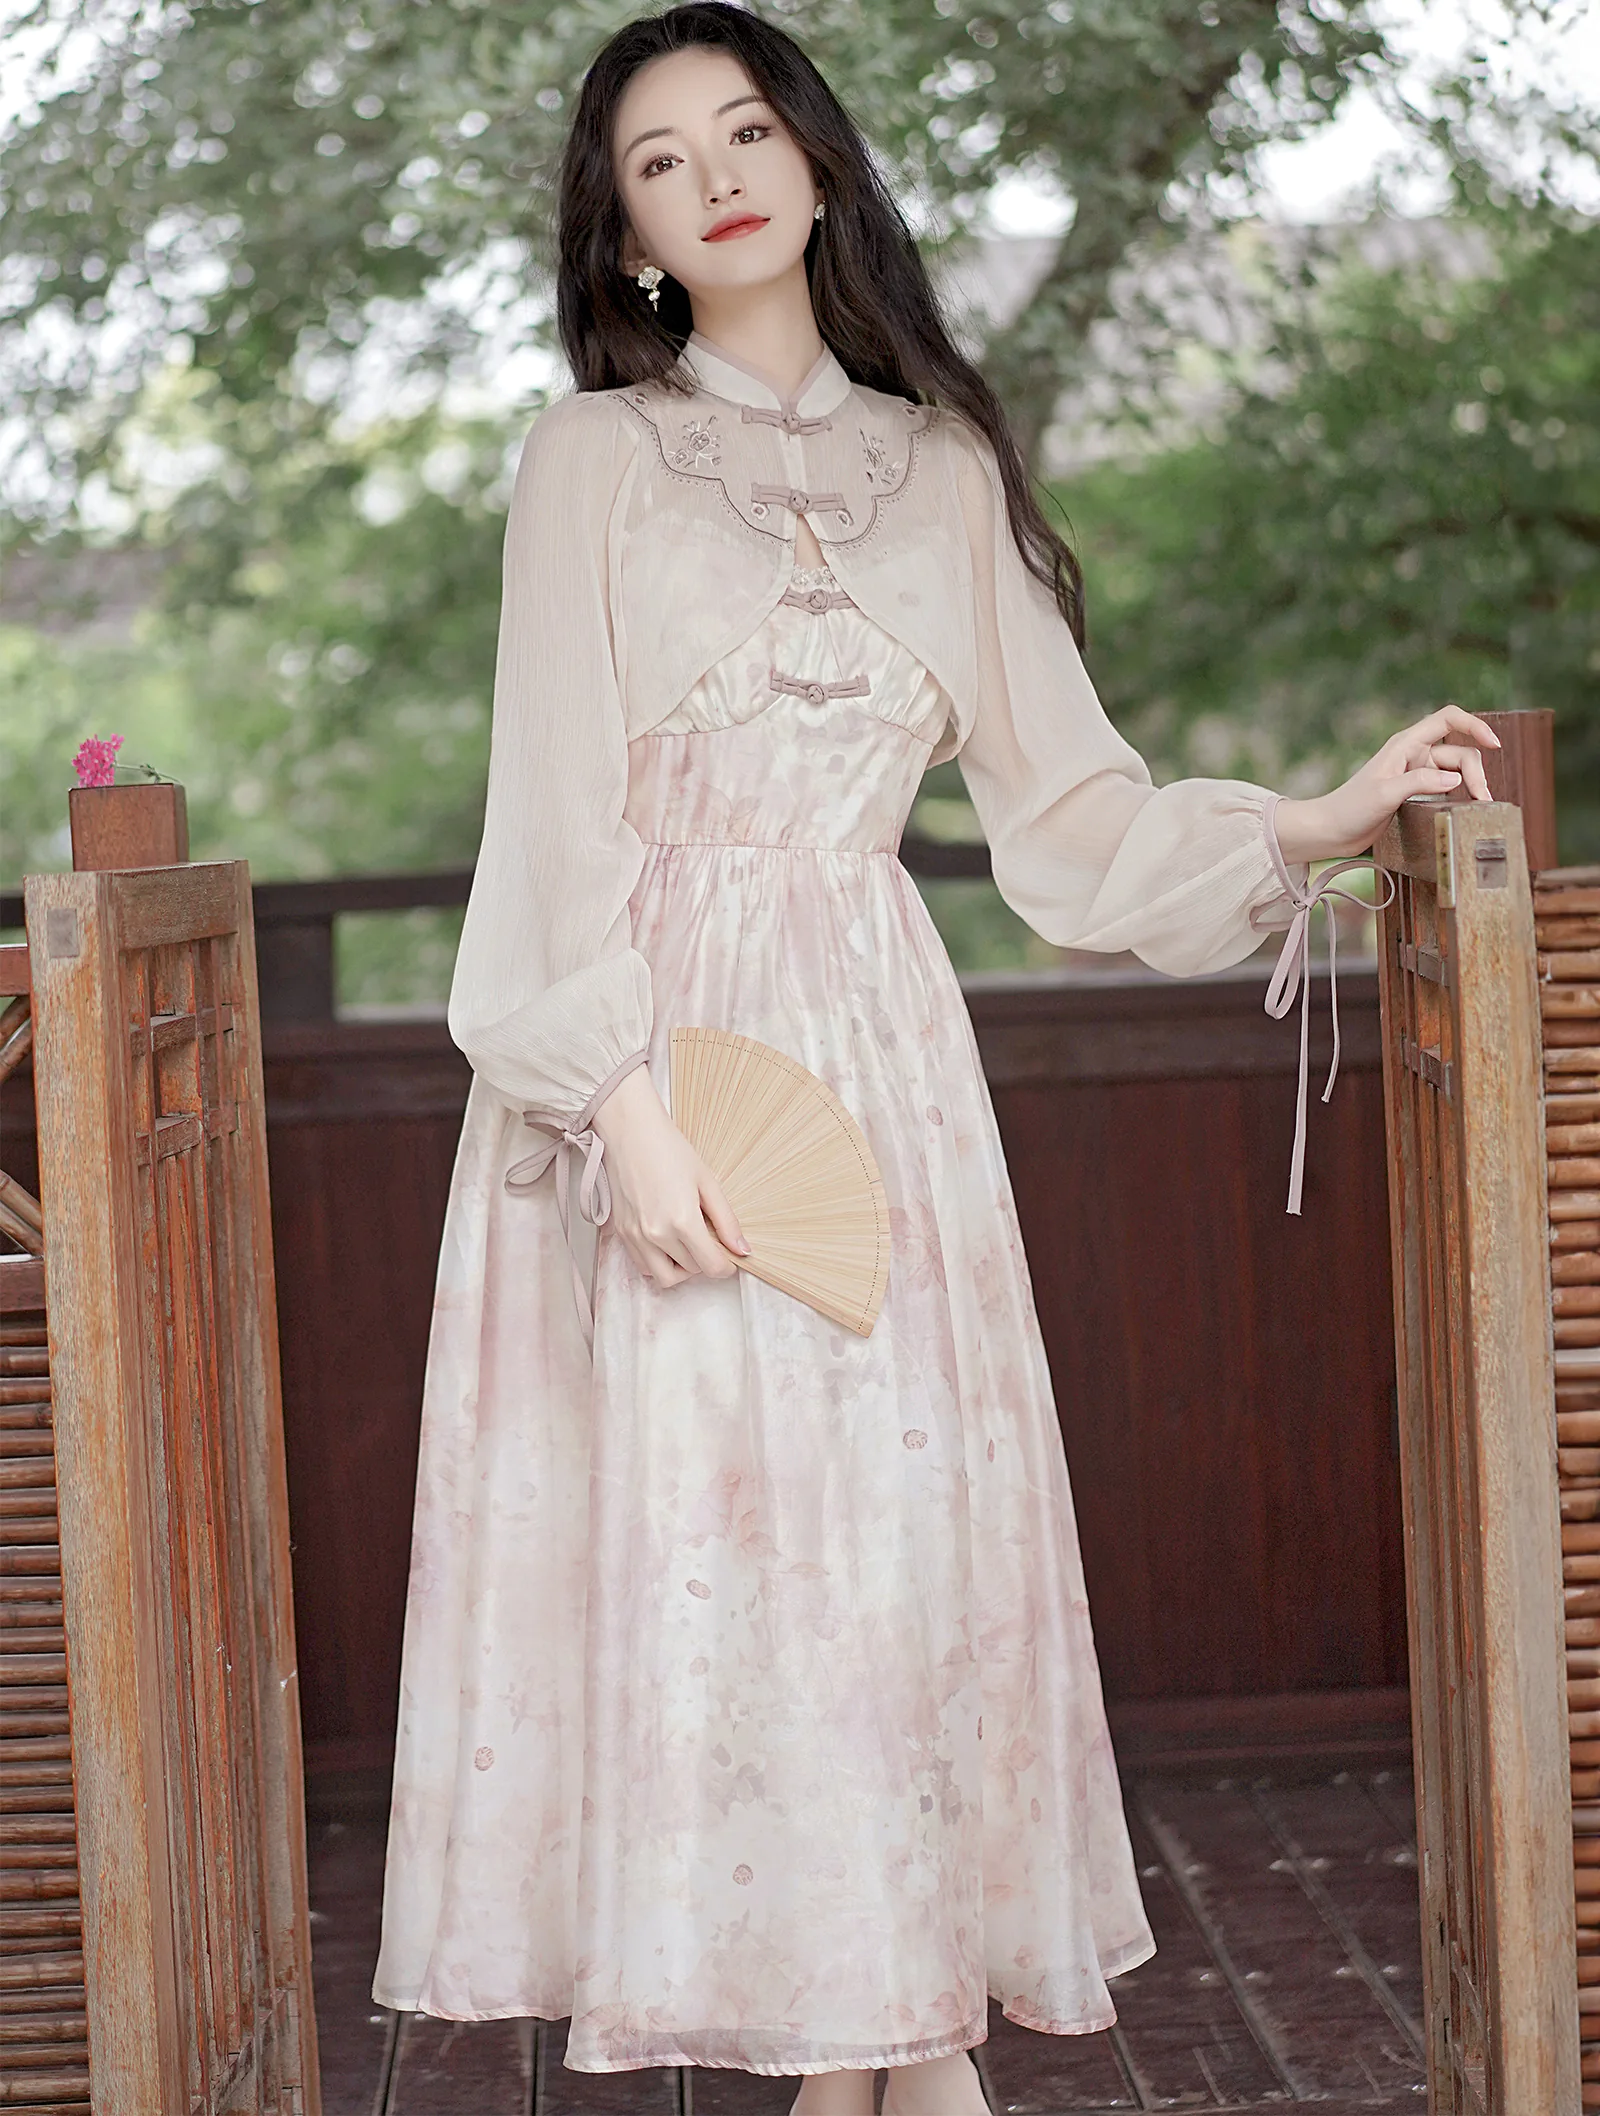 Romantic Soft Pink Floral Casual Dress with Chiffon Sun Protection Top01